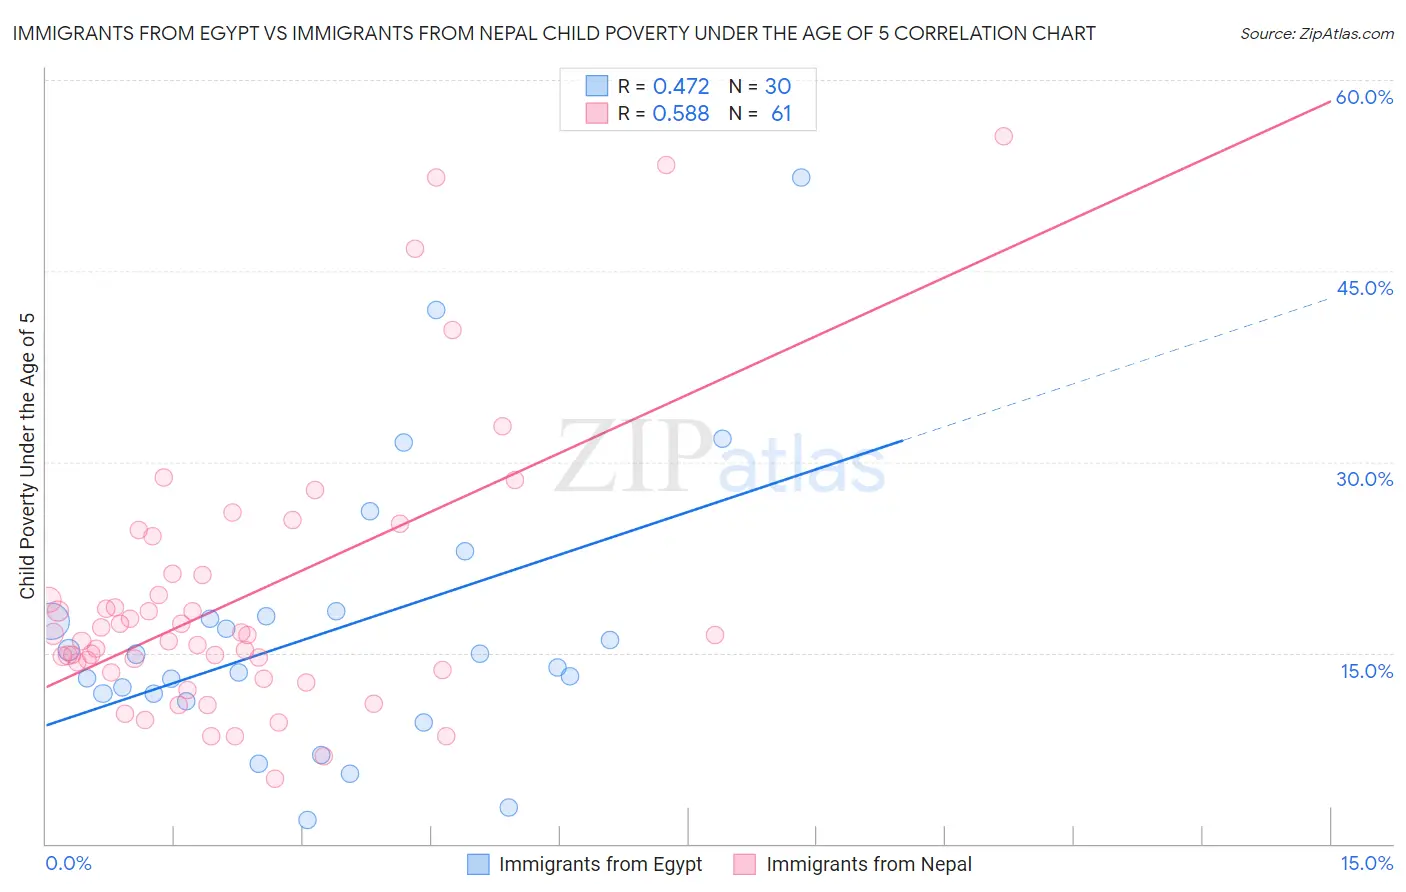 Immigrants from Egypt vs Immigrants from Nepal Child Poverty Under the Age of 5